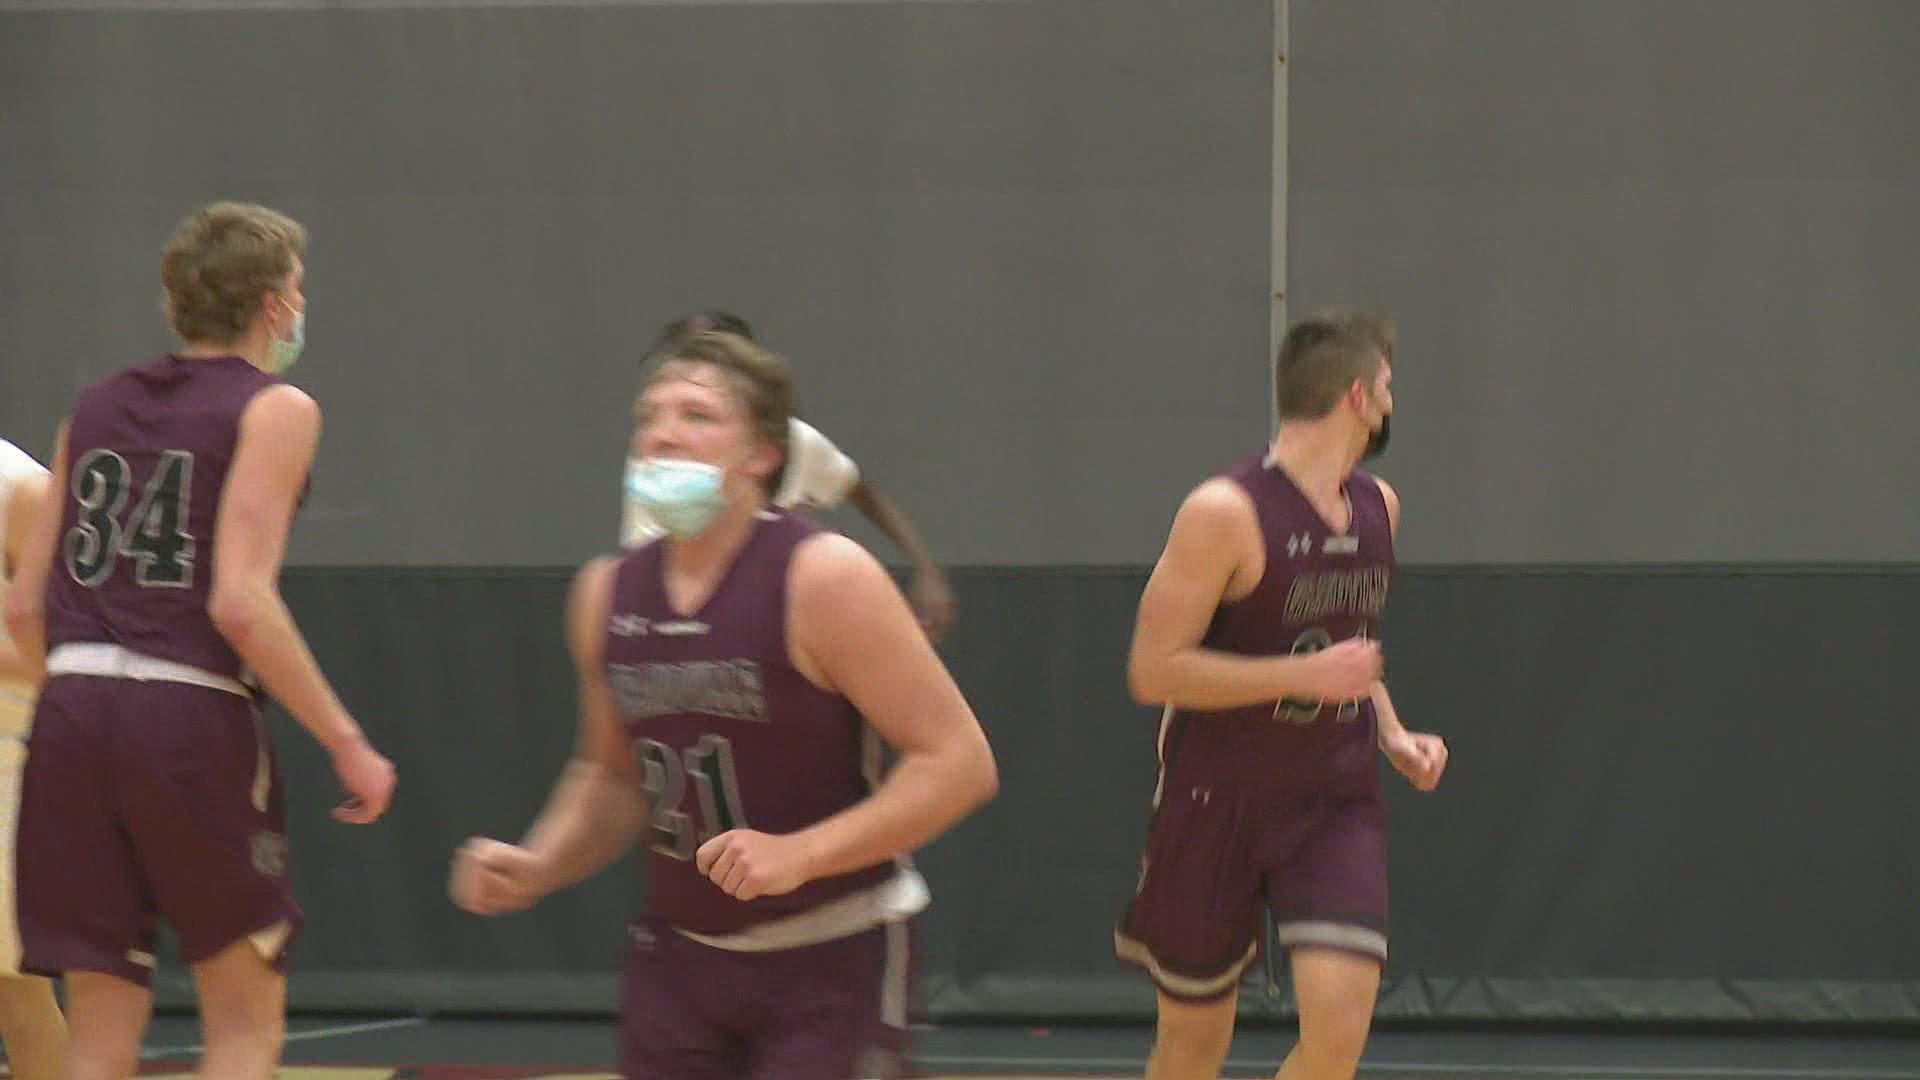 Grandville rallies from a double digit deficit to win 61-57.